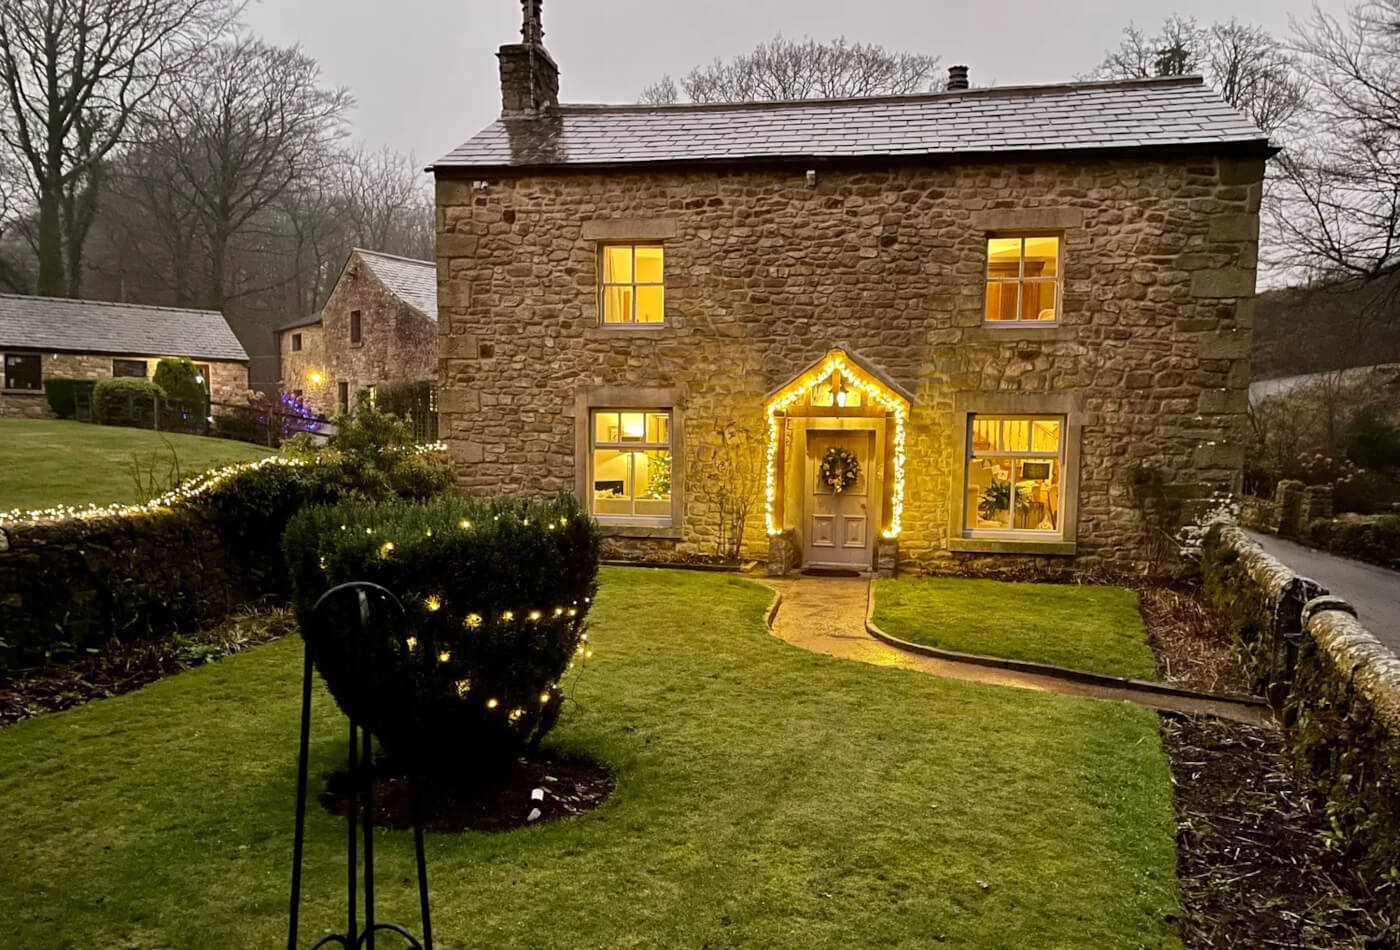 A stonebuilt cottage with lights around the doorframe and on a tree in the green front garden